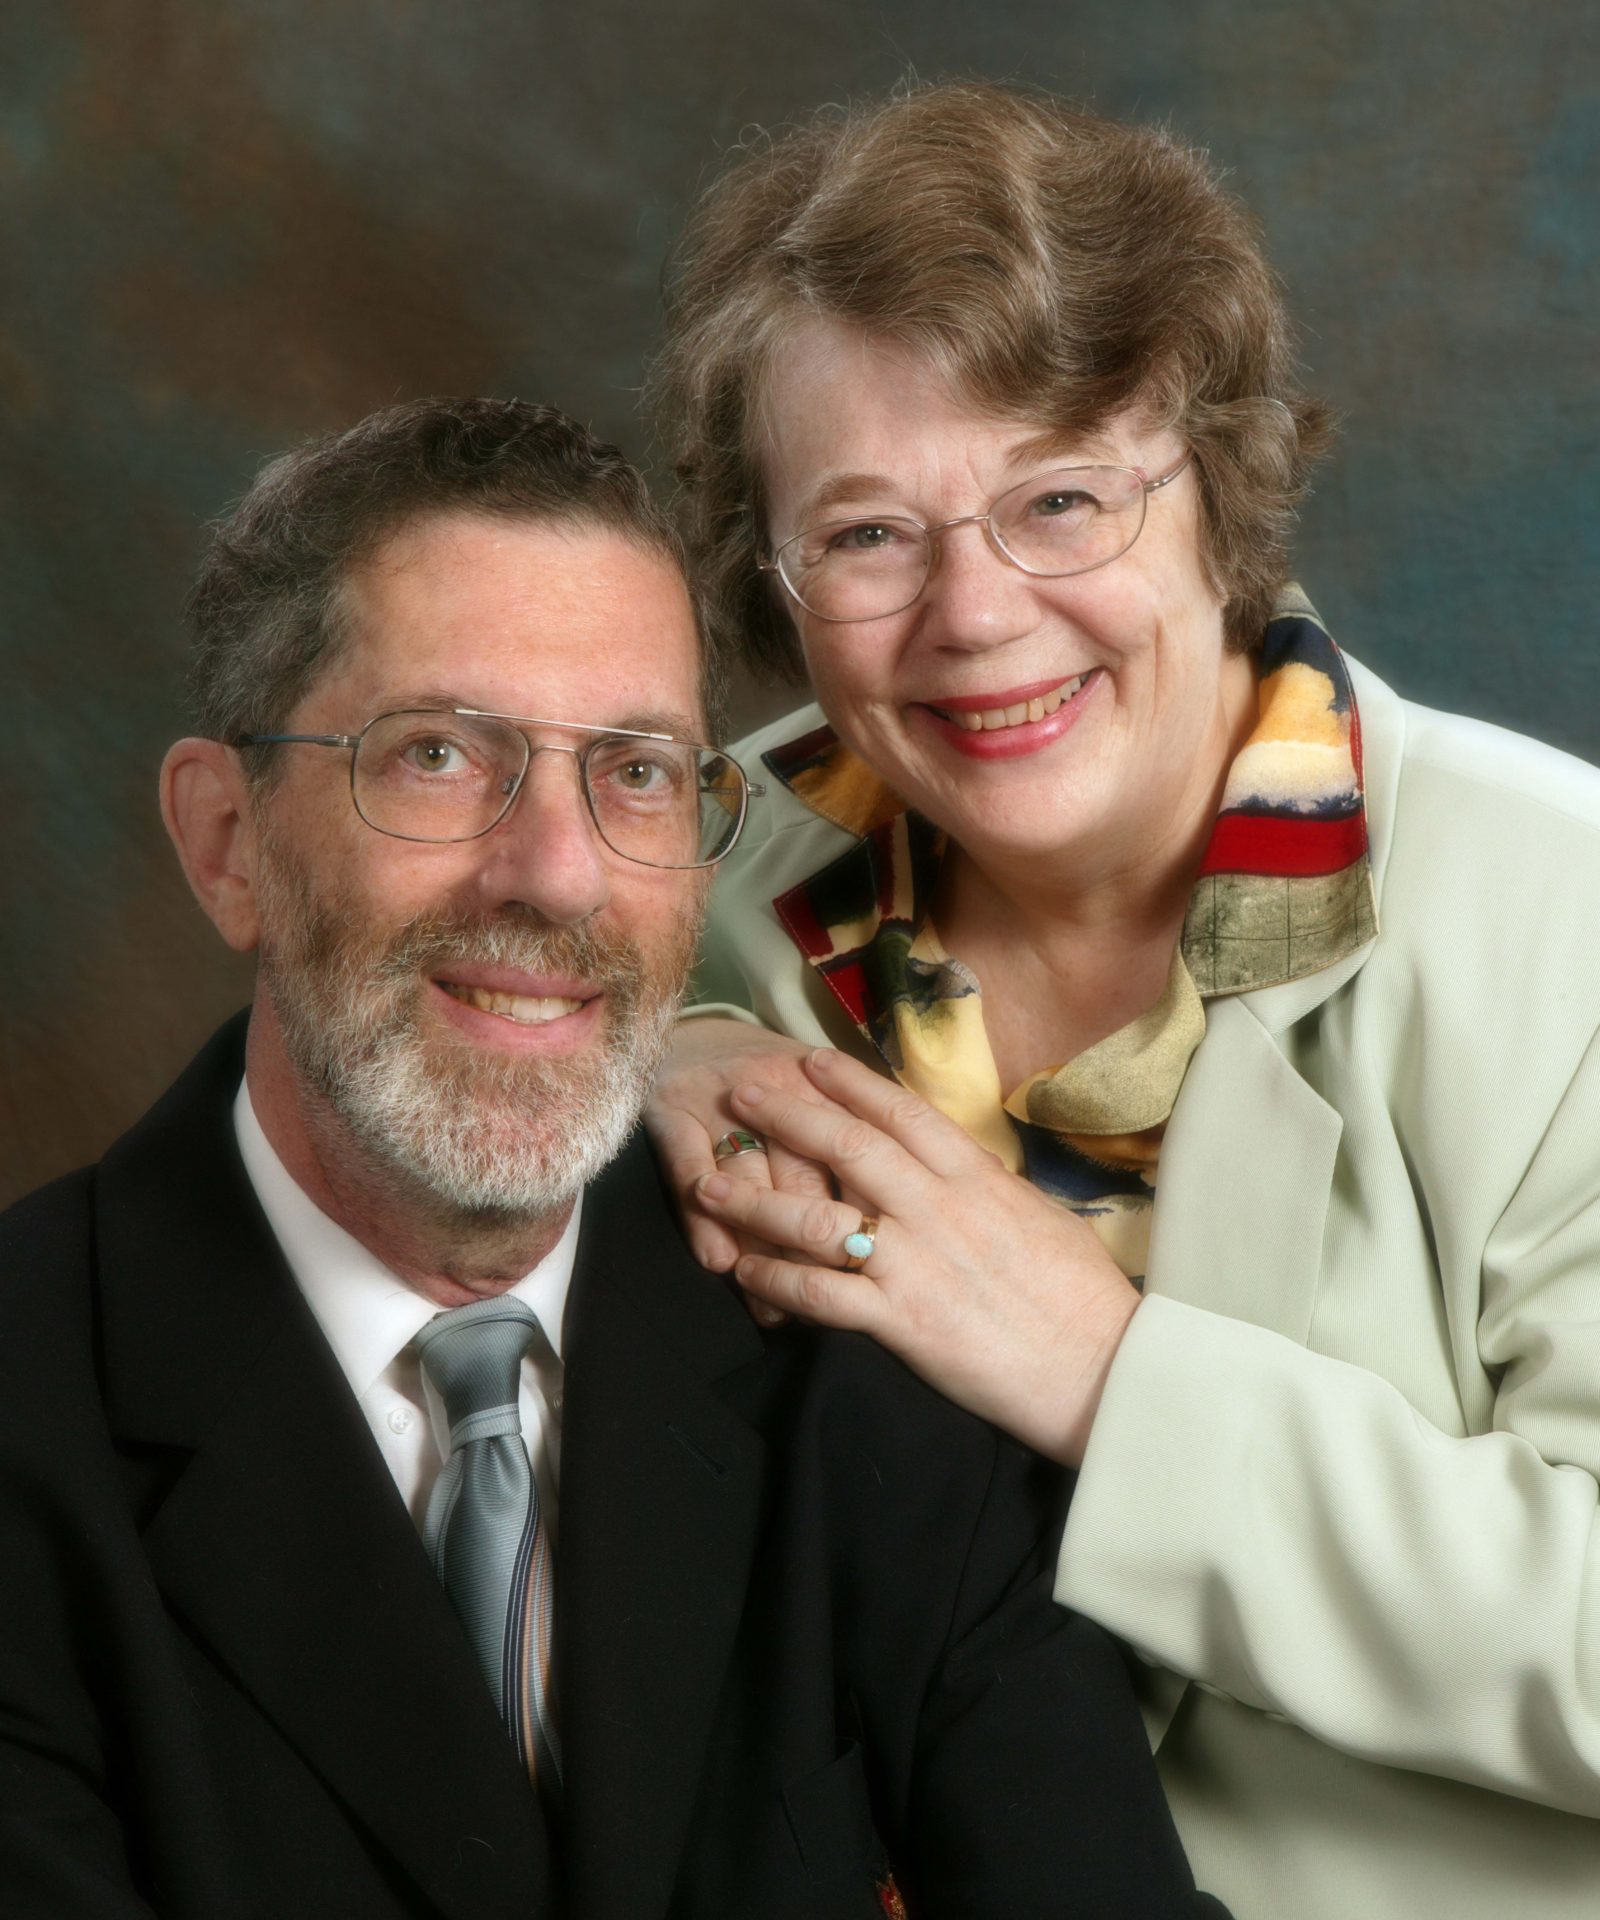 A man and a woman pose together in front of a beige backdrop.